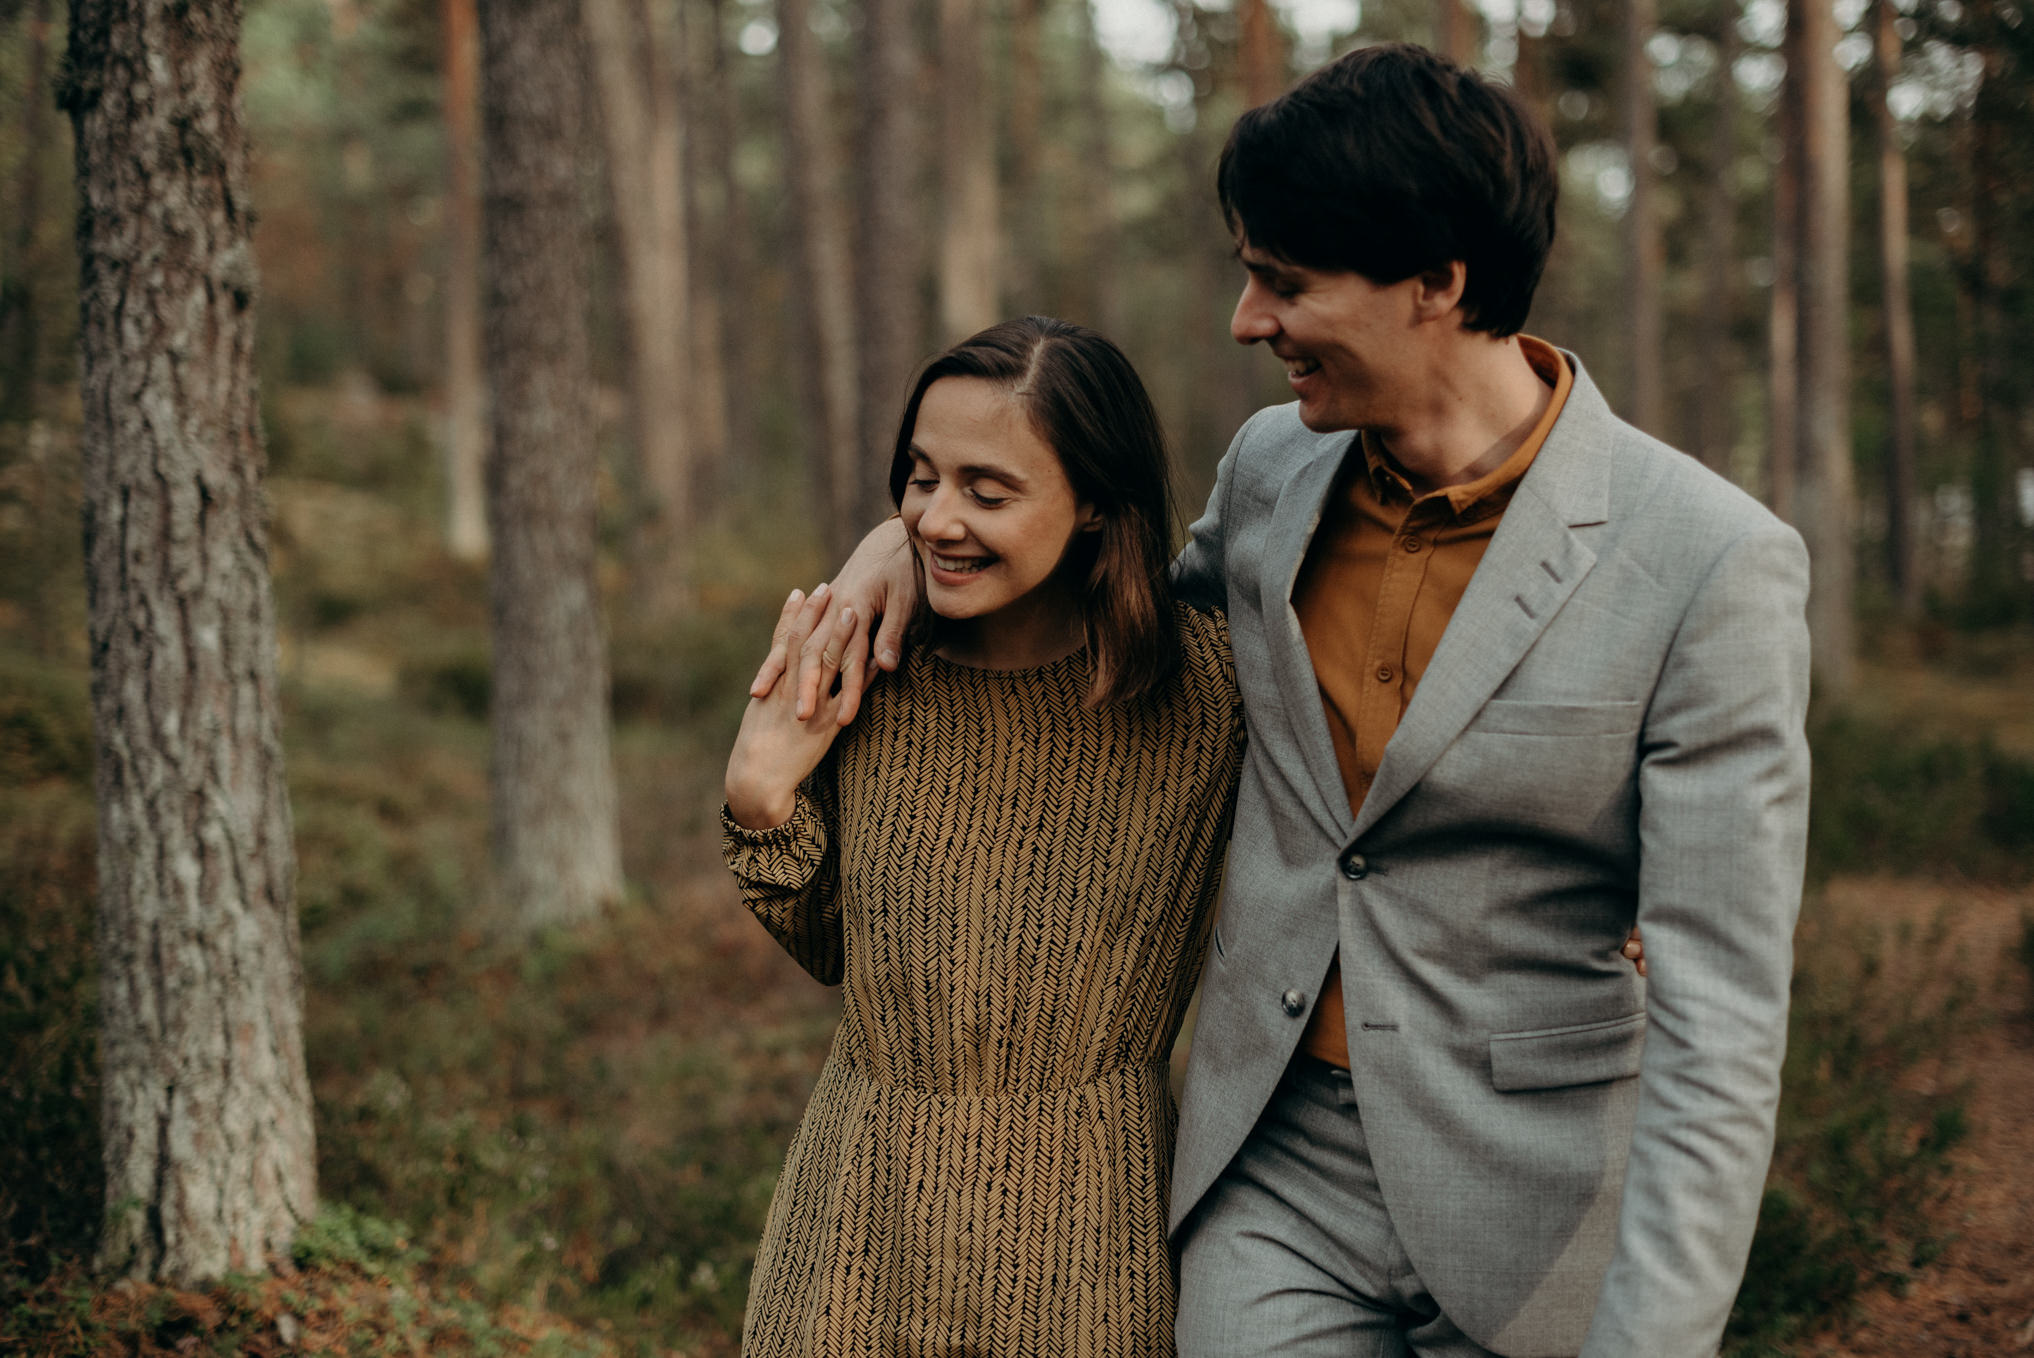 couple laughing and walking in forest